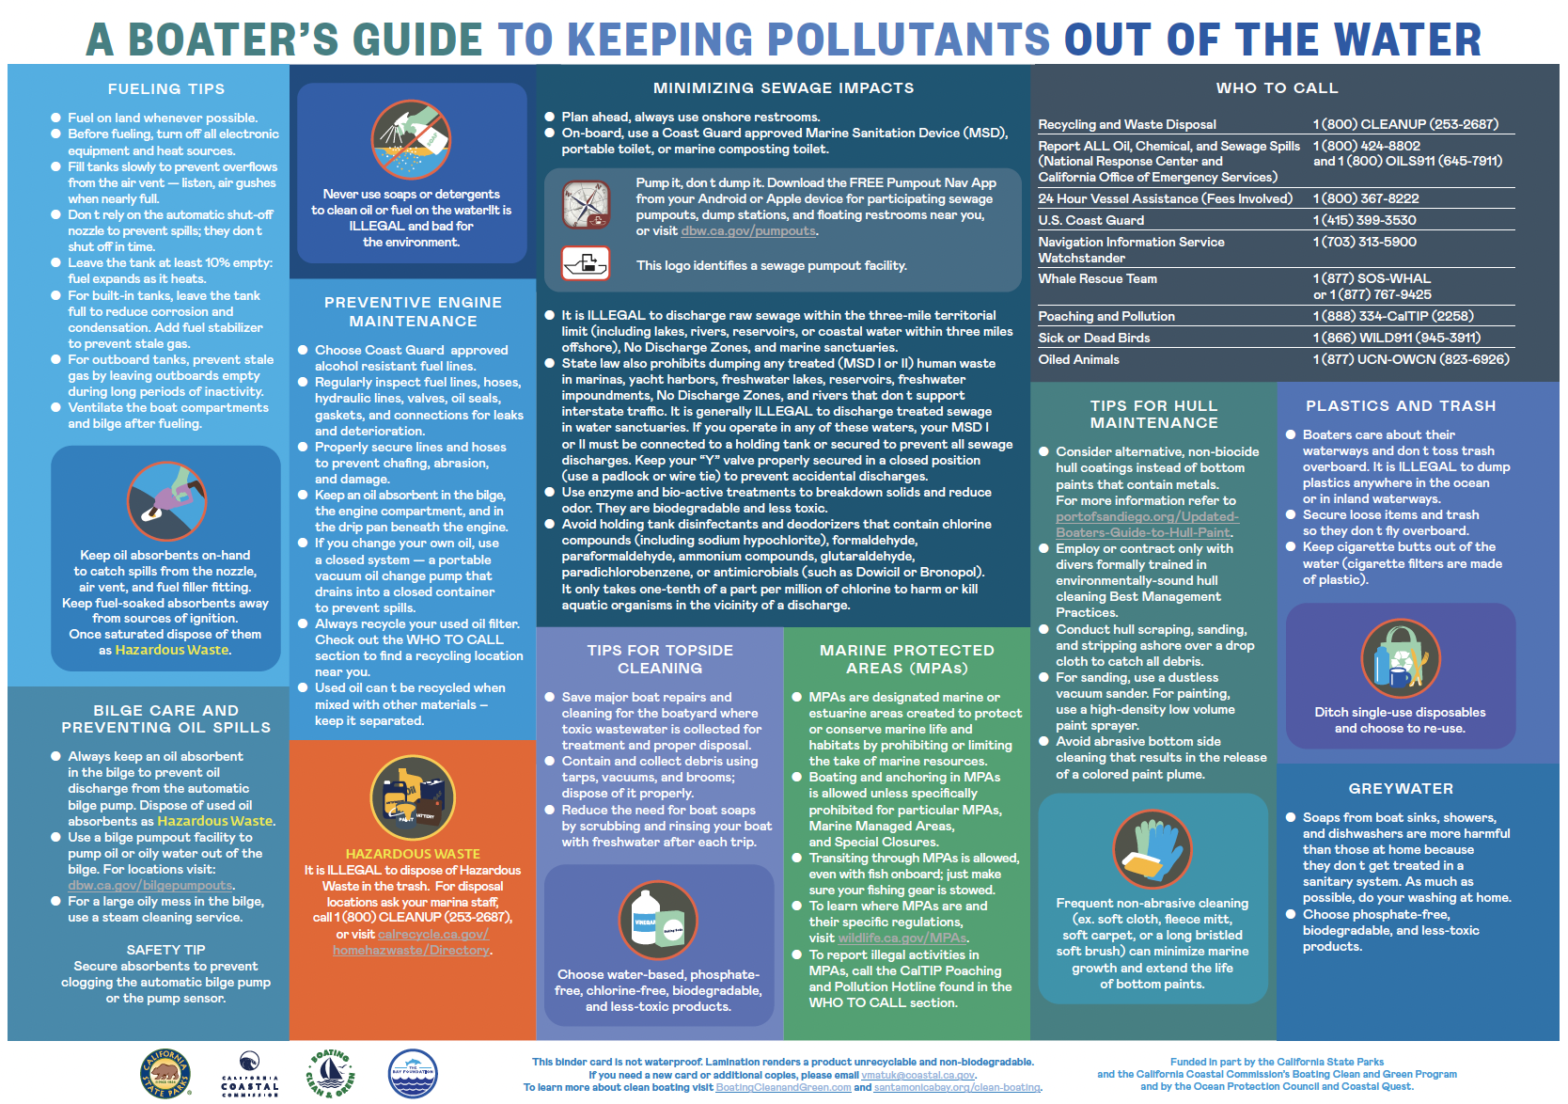 A Boater's Guide to Keeping Pollutants Out of the Water